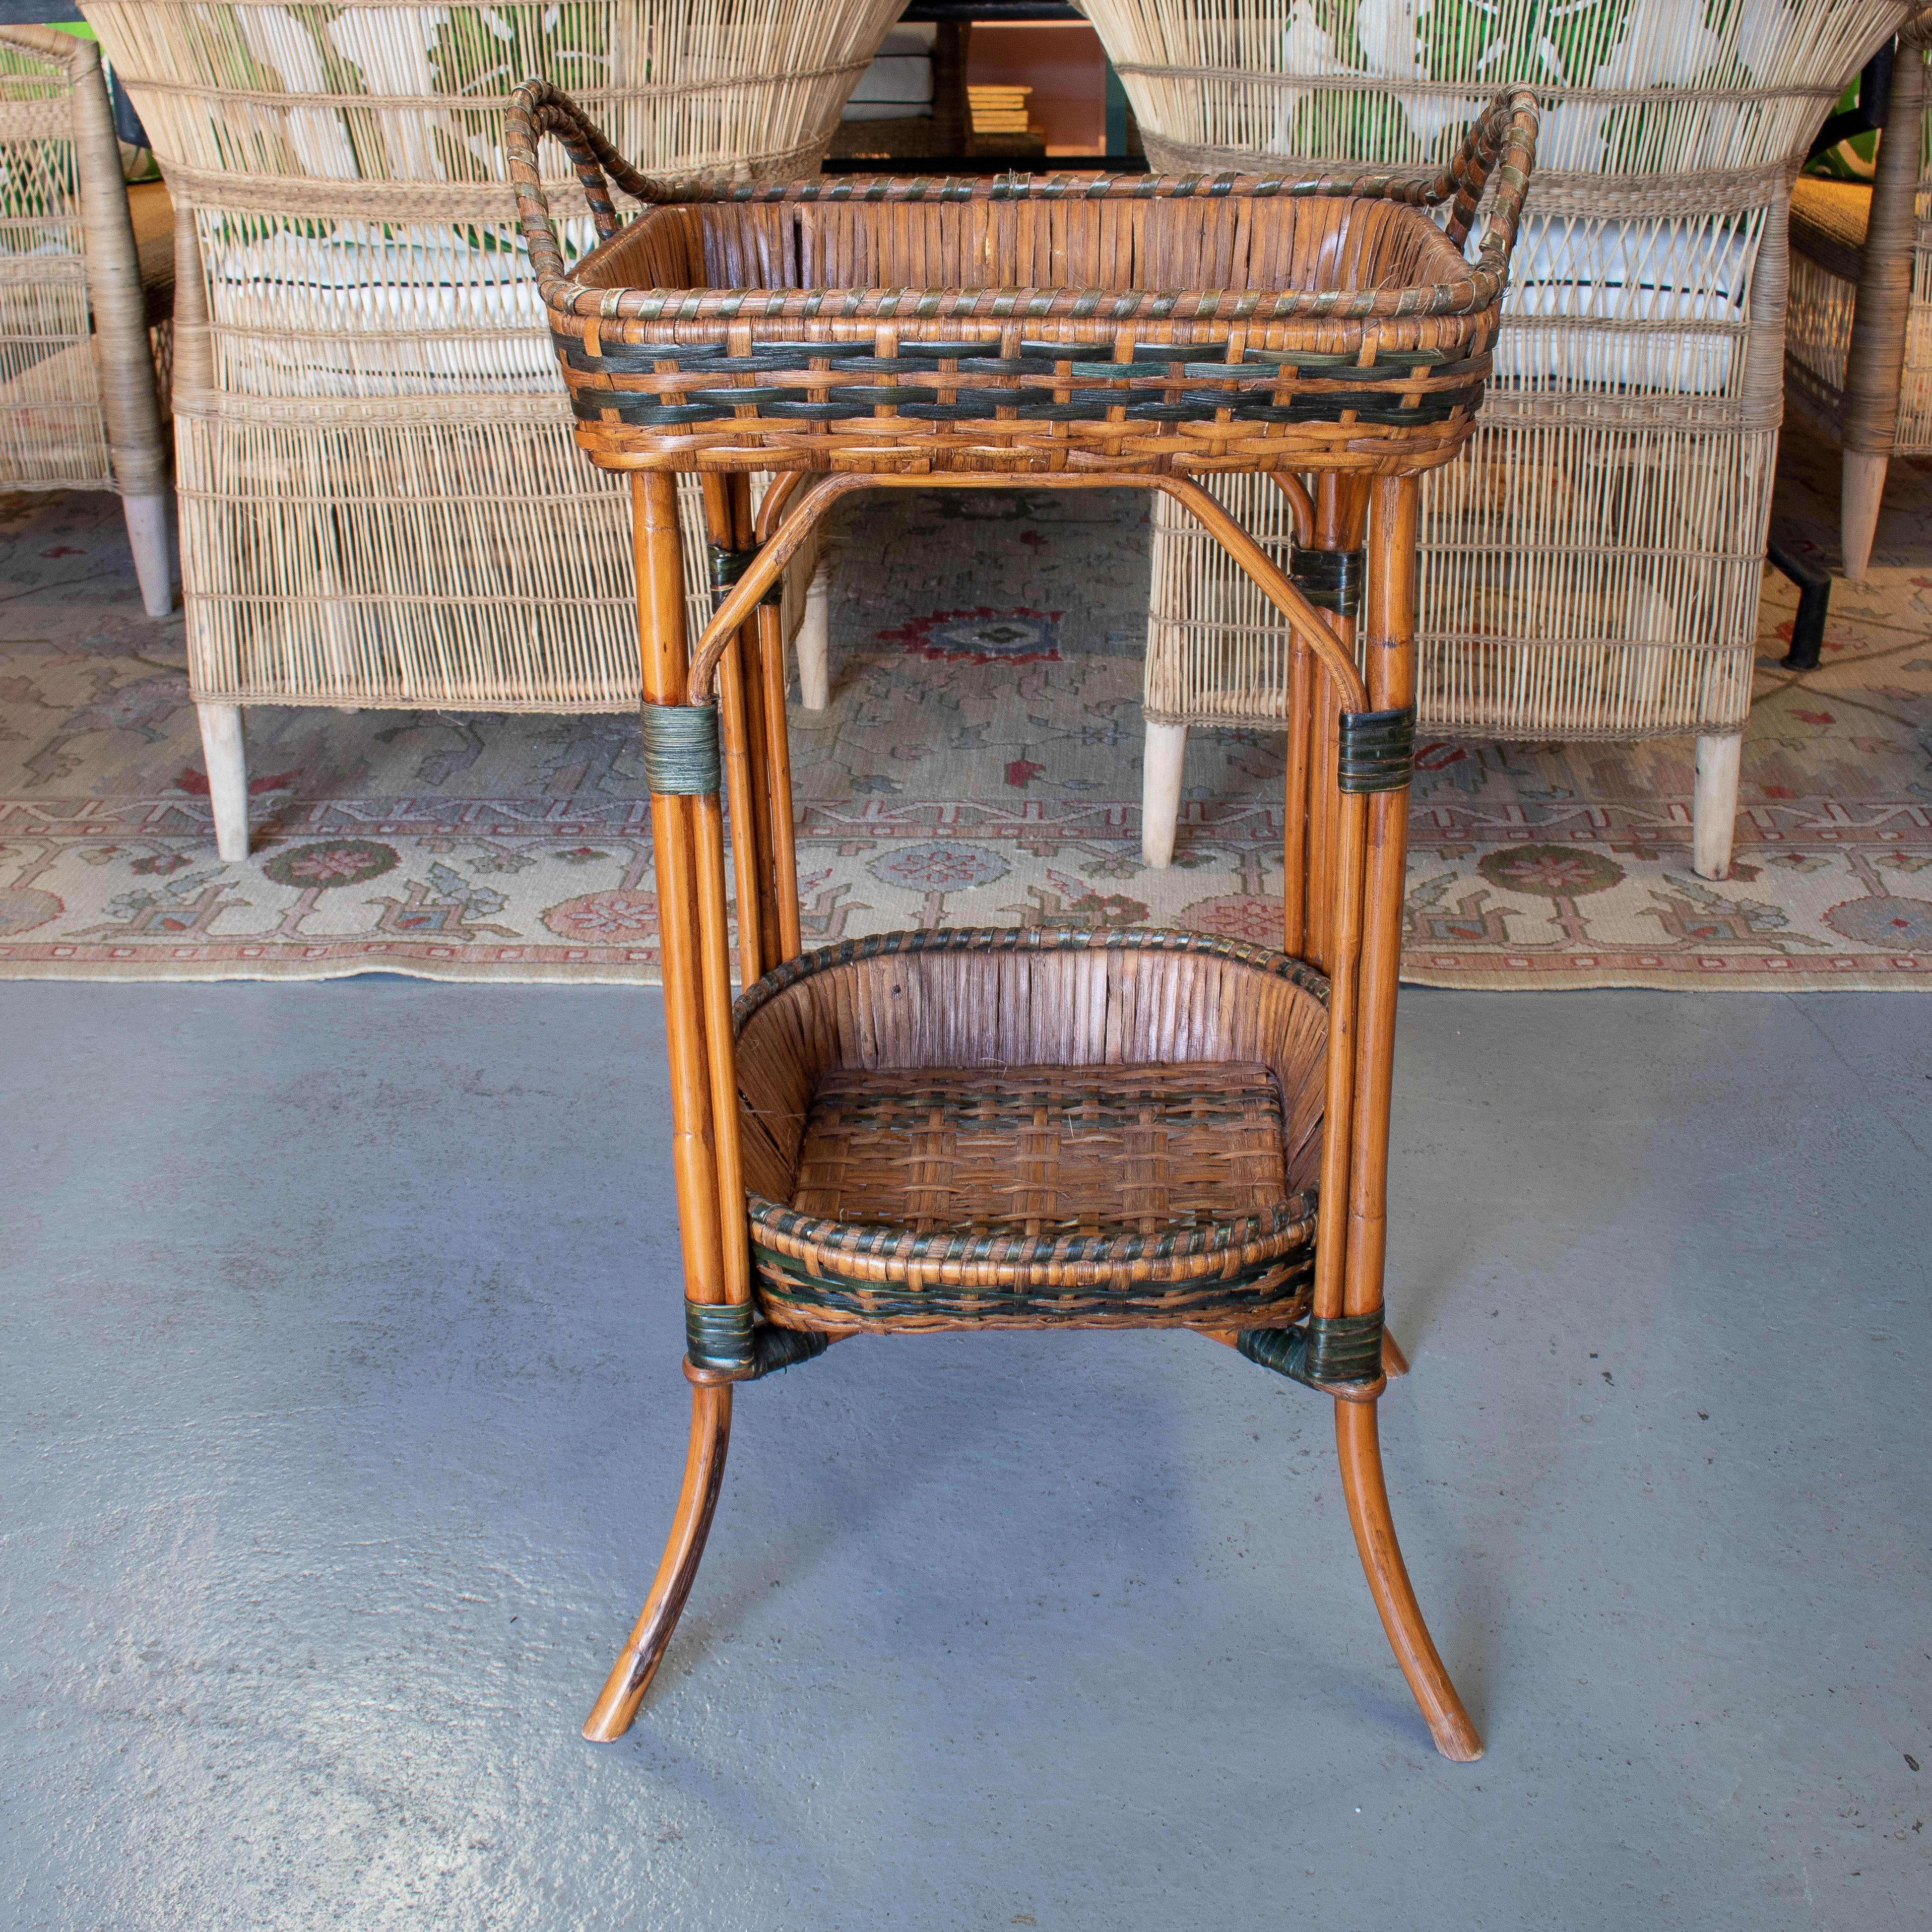 Vintage 1970s Spanish 2-tone woven wicker side table with tray.